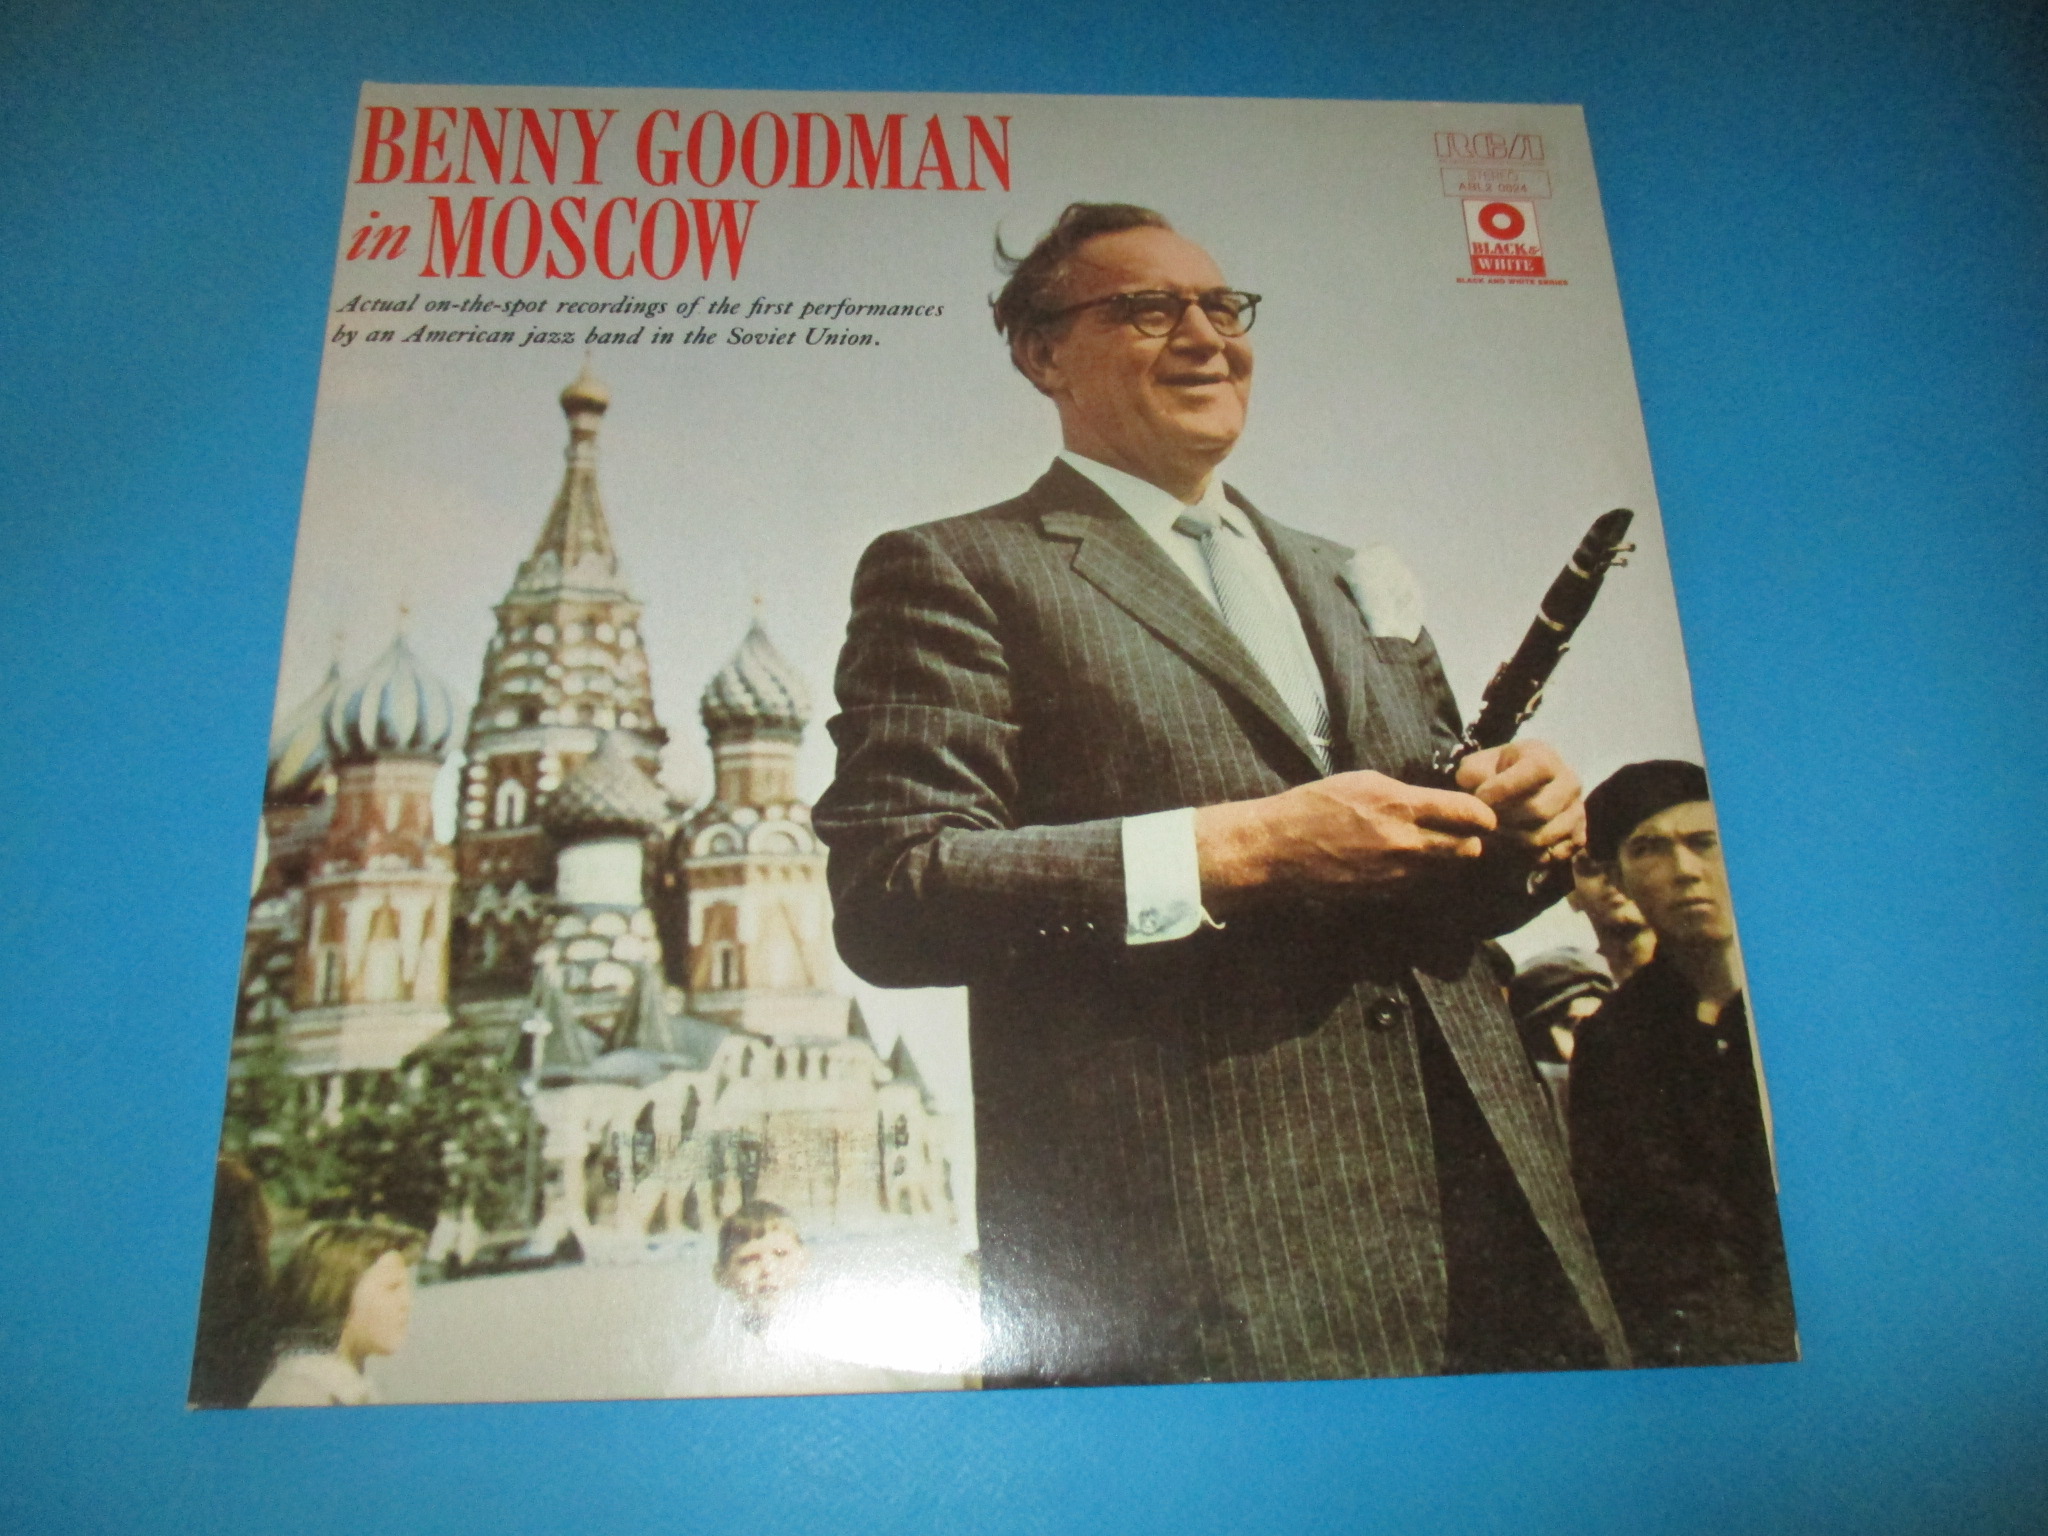 Disque double Benny Goodman in Moscow, First performances by an American jazz band in the Soviet Union 1962, 2 x 33 tours RCA Black & White